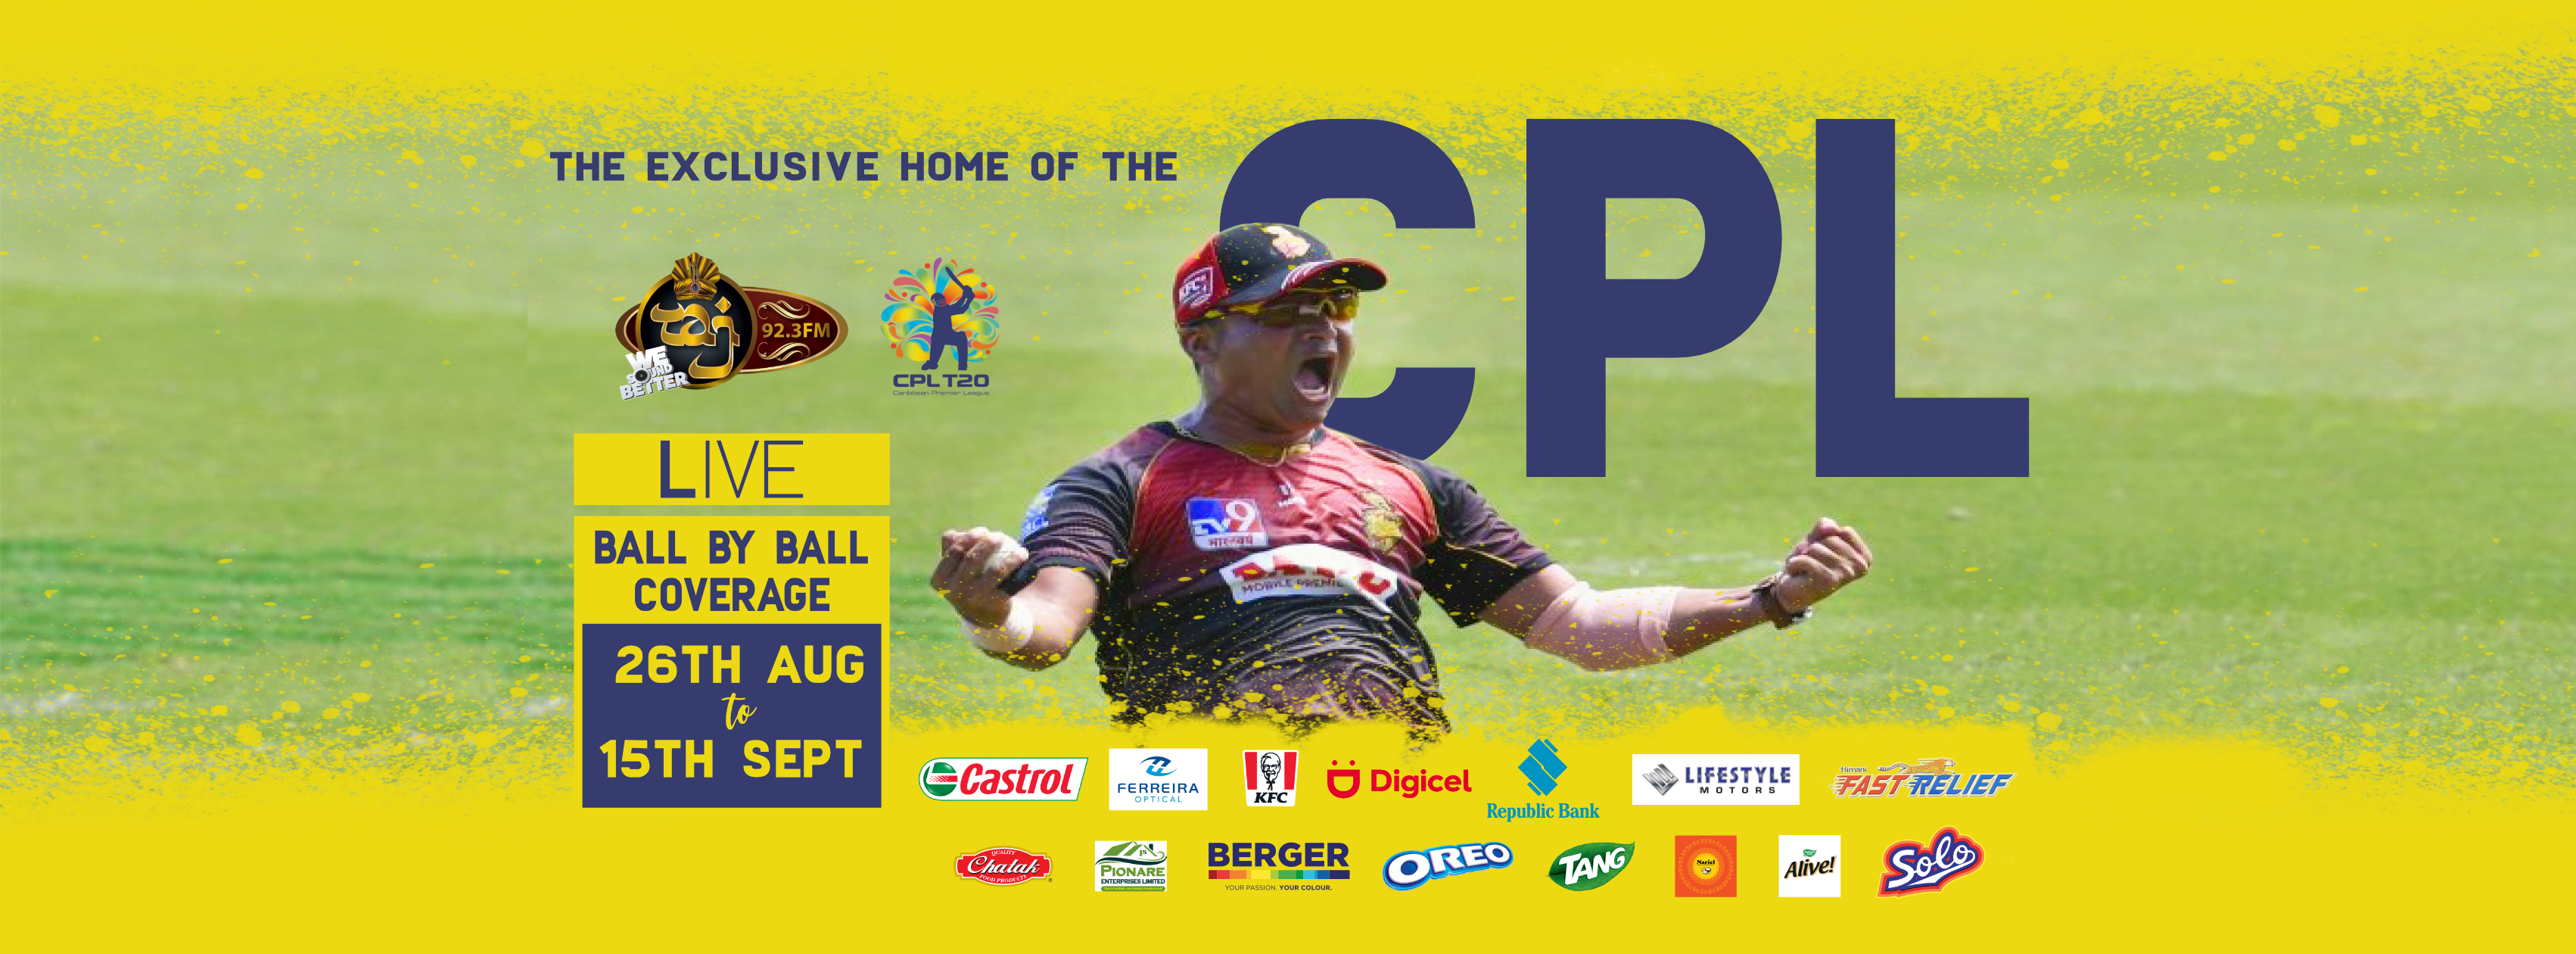 The Exclusive Home of the CPL